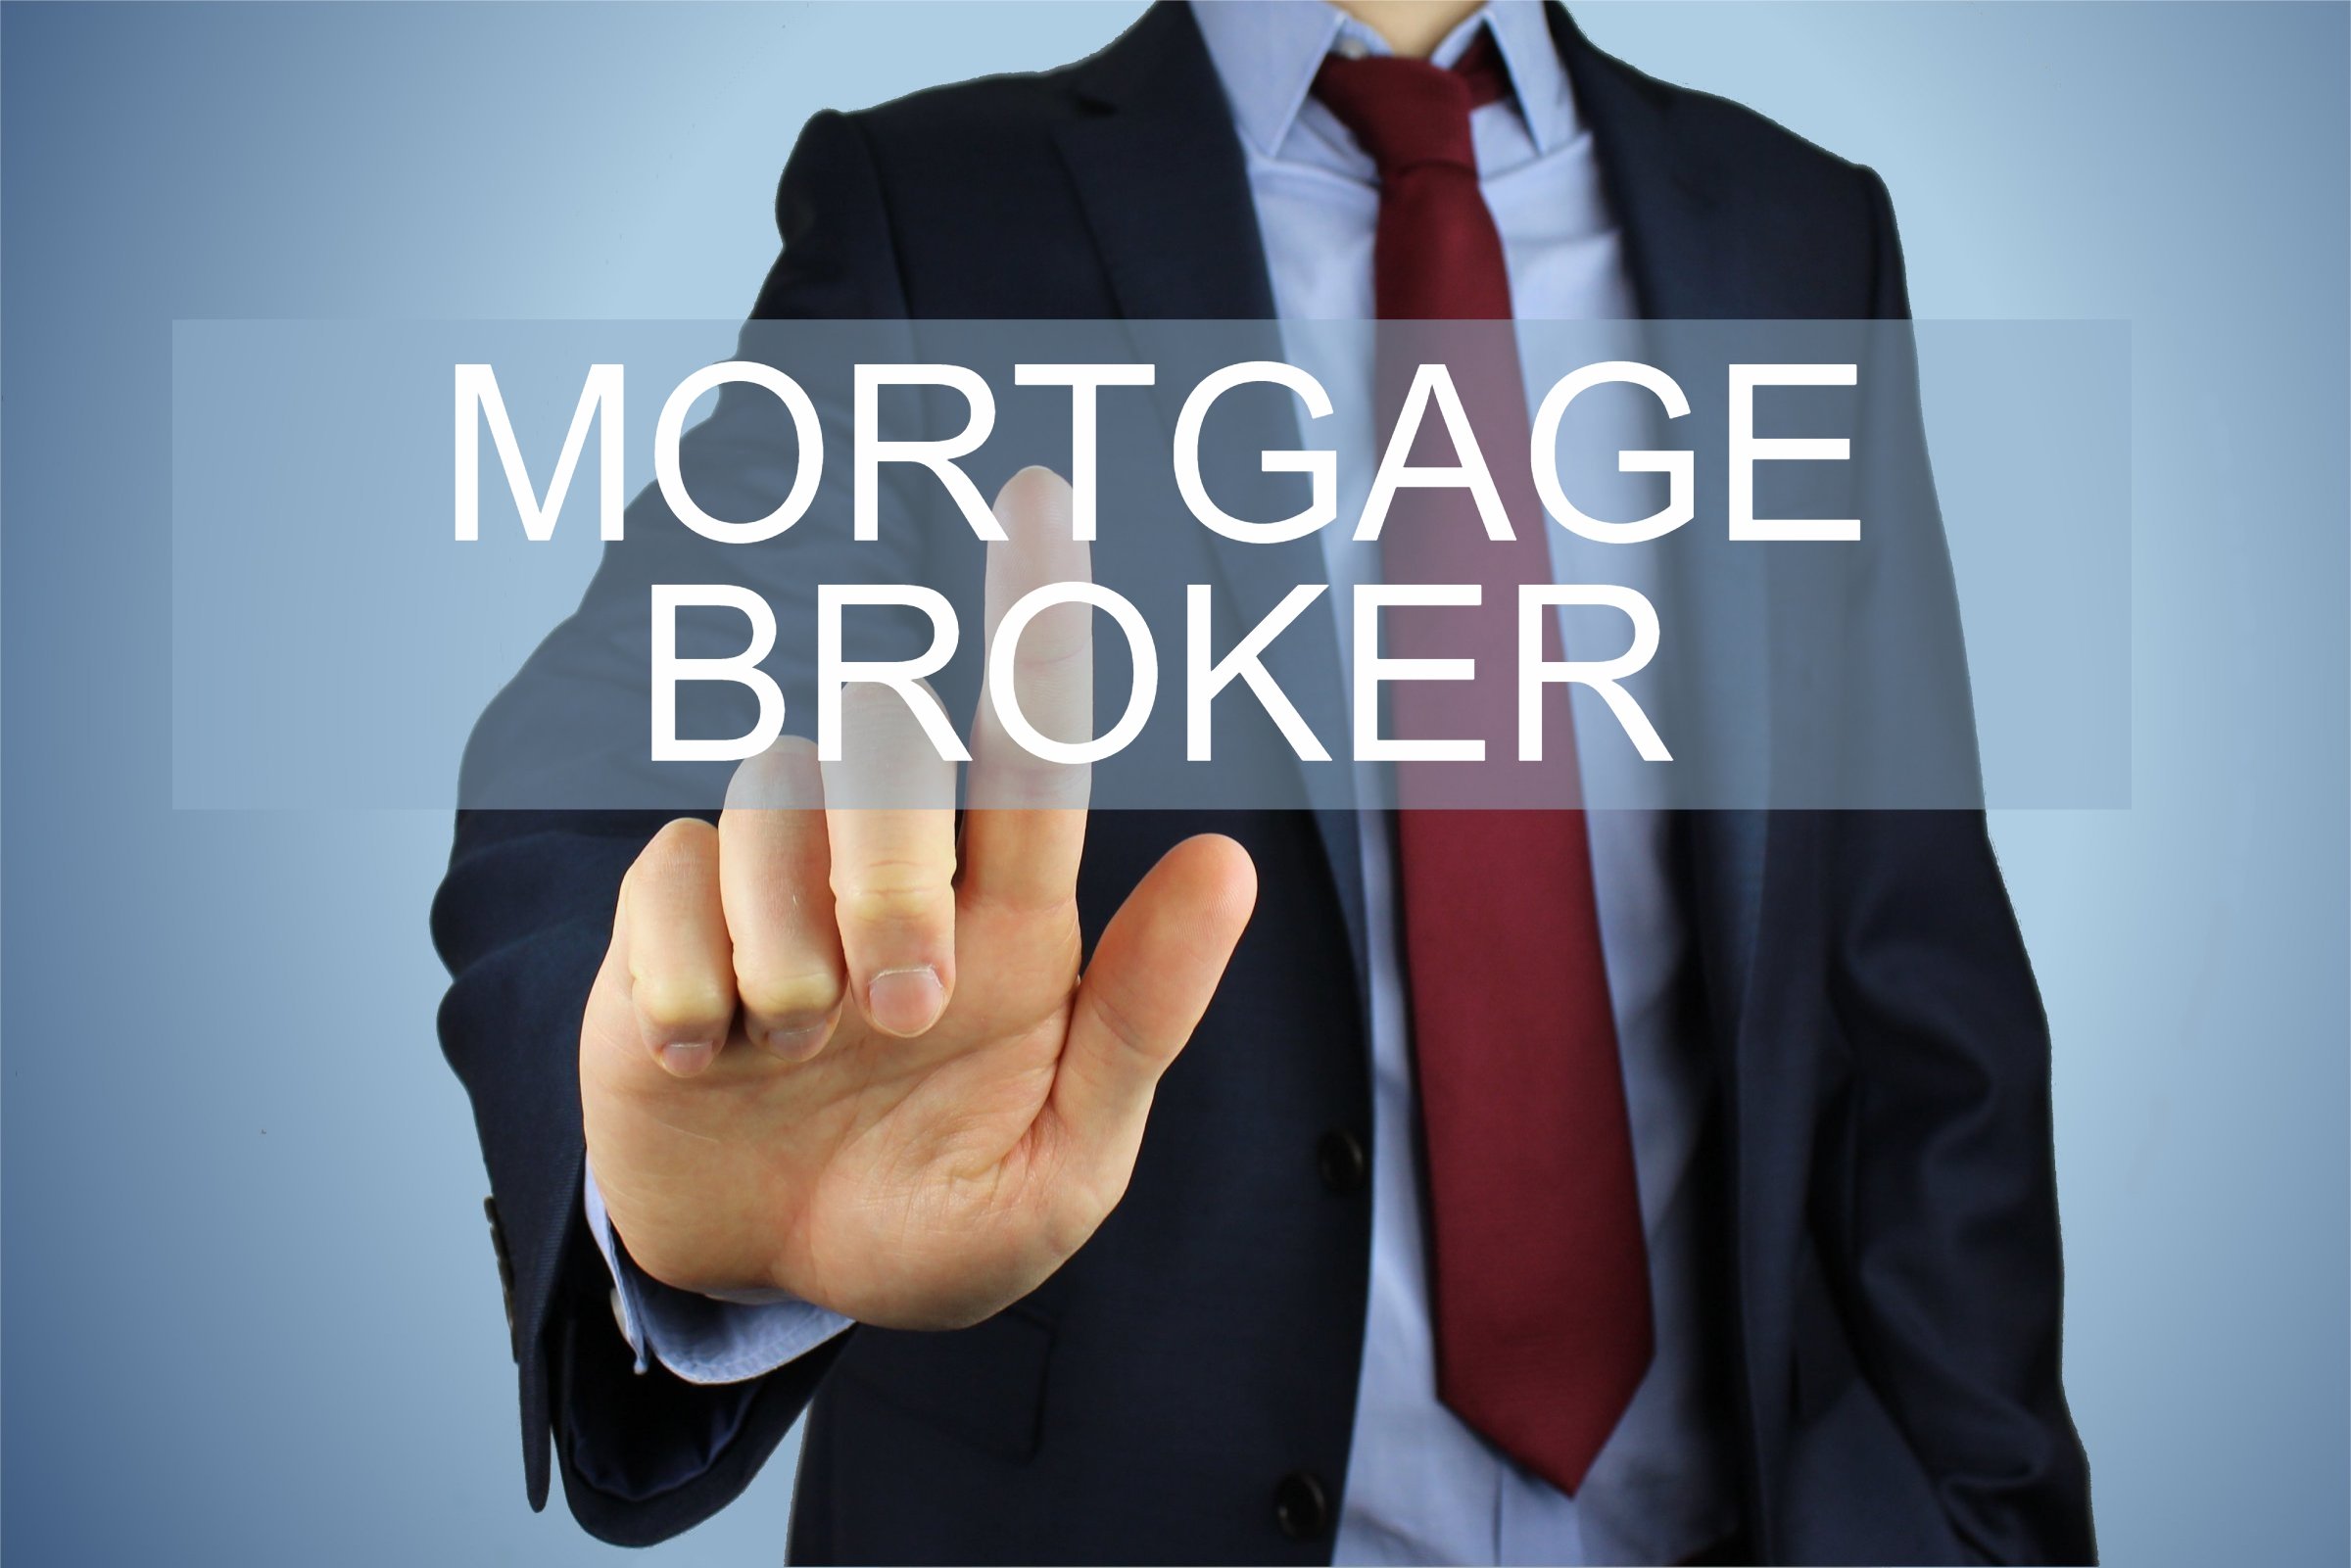 Free of Charge Creative Commons mortgage broker Image